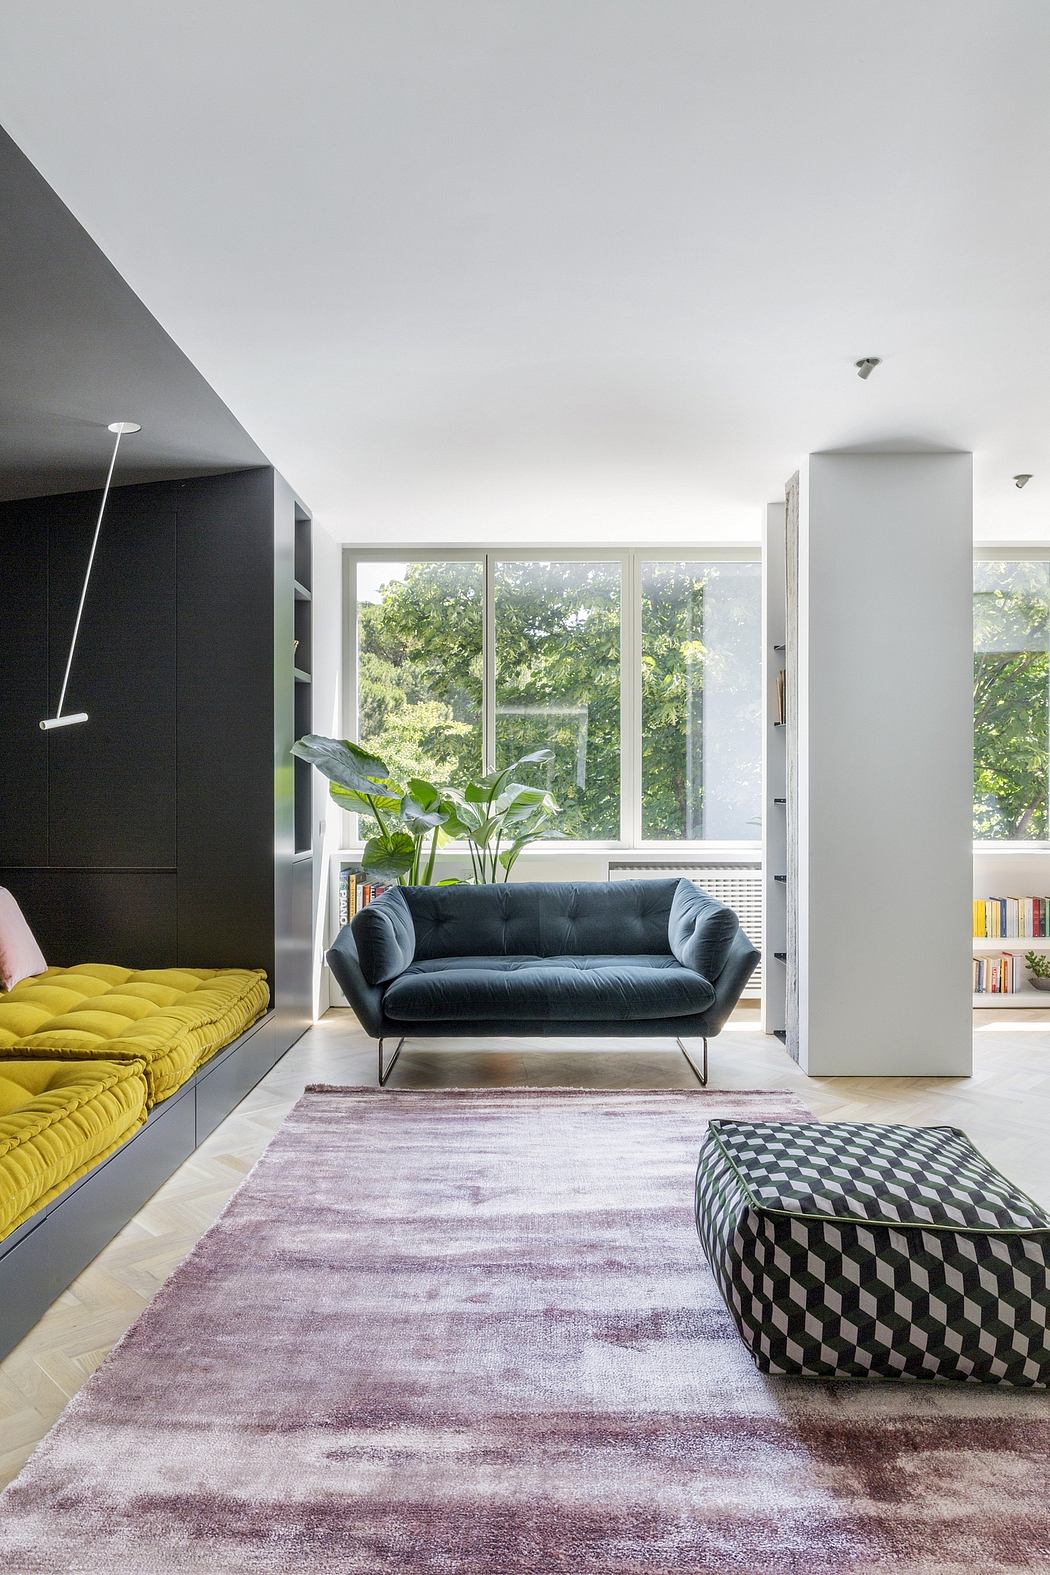 An Eclectic, Monochromatic Apartment in Rouen, France by Dmitry Grinevich